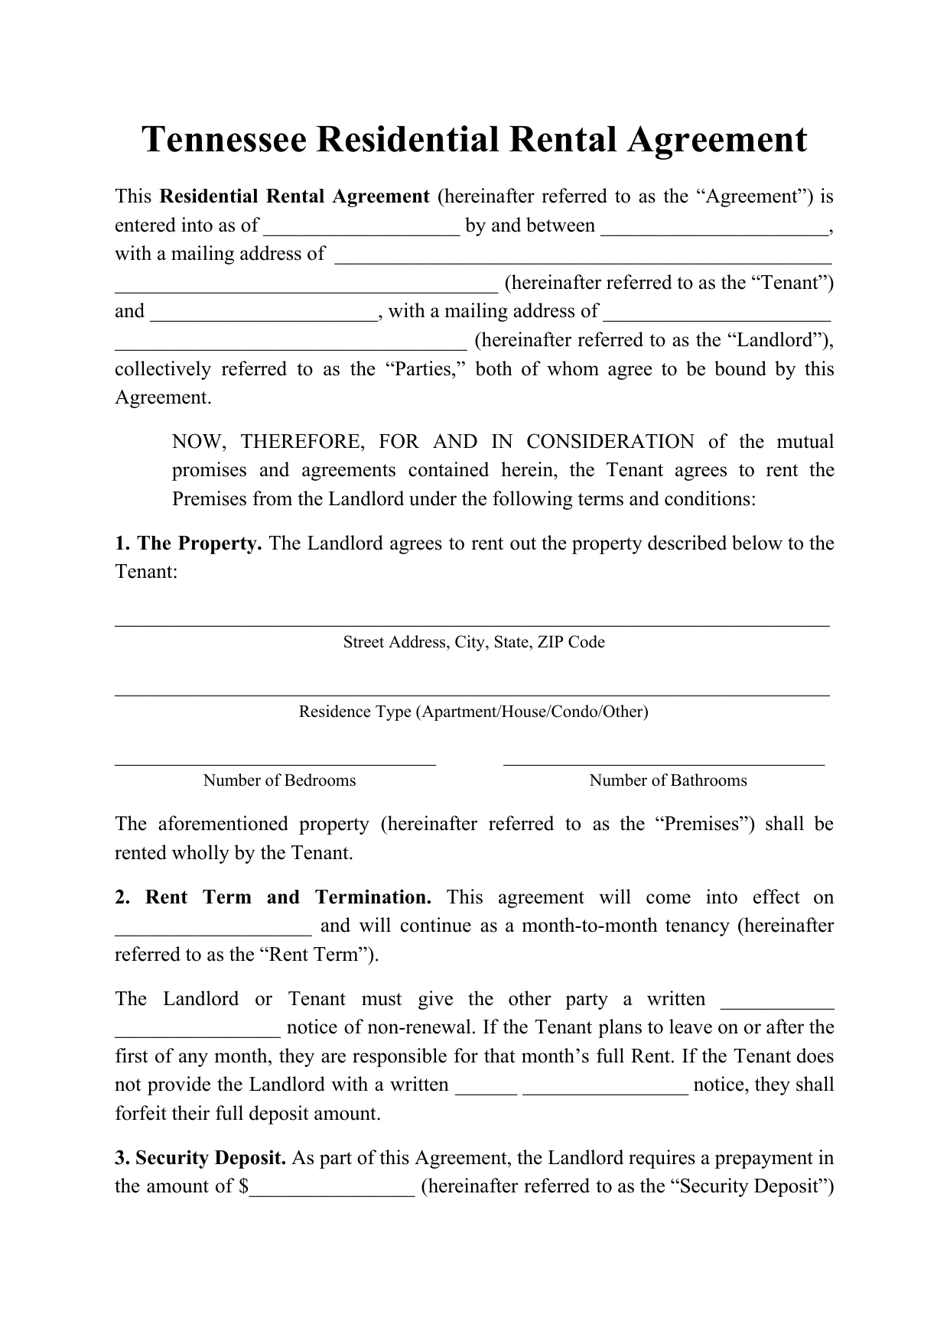 tennessee-residential-rental-agreement-template-download-printable-pdf-templateroller